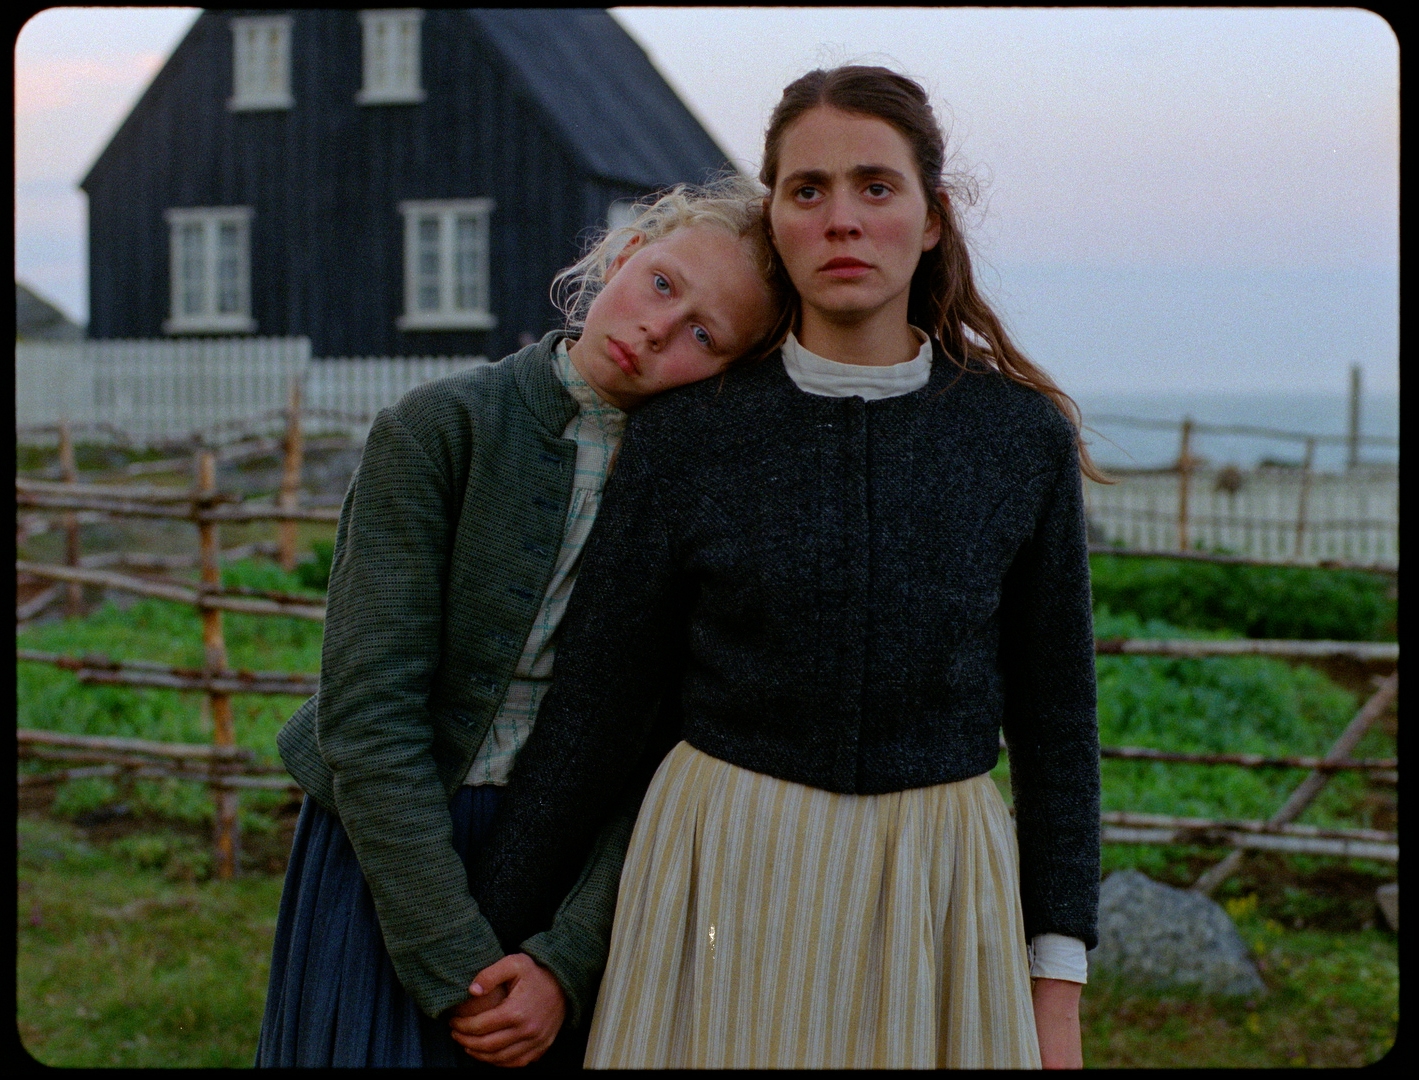 Production photo from the set of Godland the movie, showing two sisters on a farm